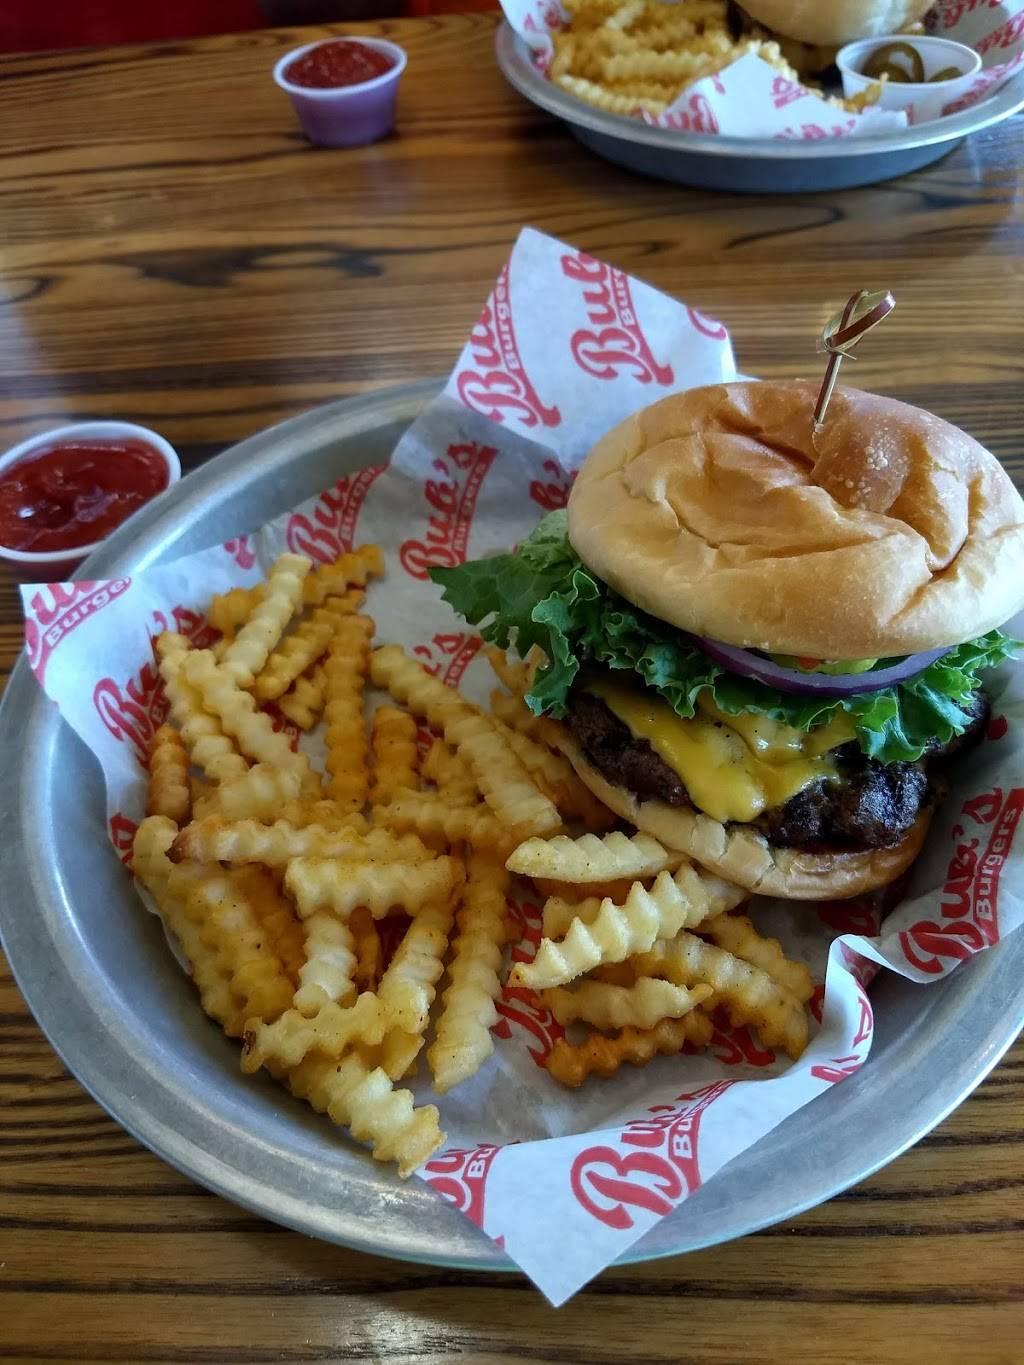 Bubs Burgers | restaurant | 960 Tournament Trail, Westfield, IN 46074, USA | 3178962874 OR +1 317-896-2874